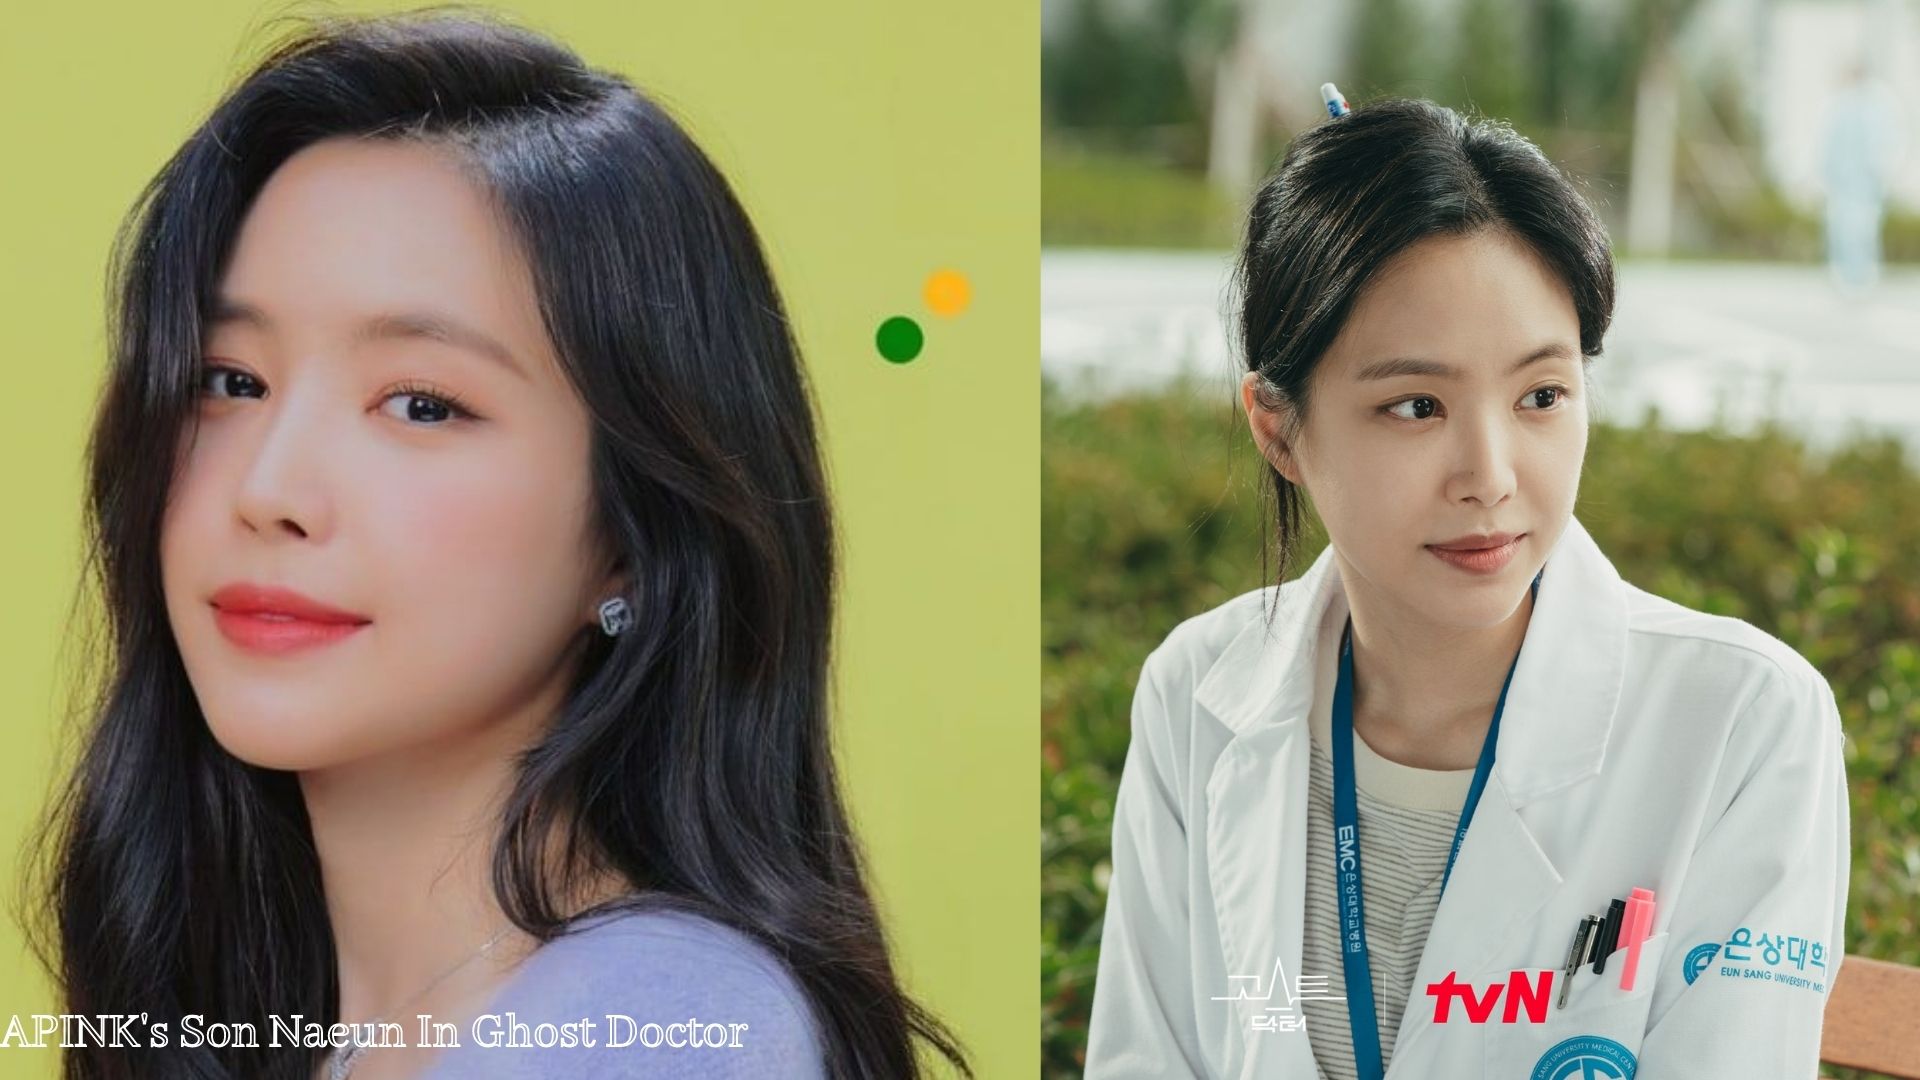 APINK’s ‘Son Nauen’ Talks About Her Character In ‘Ghost Doctor’